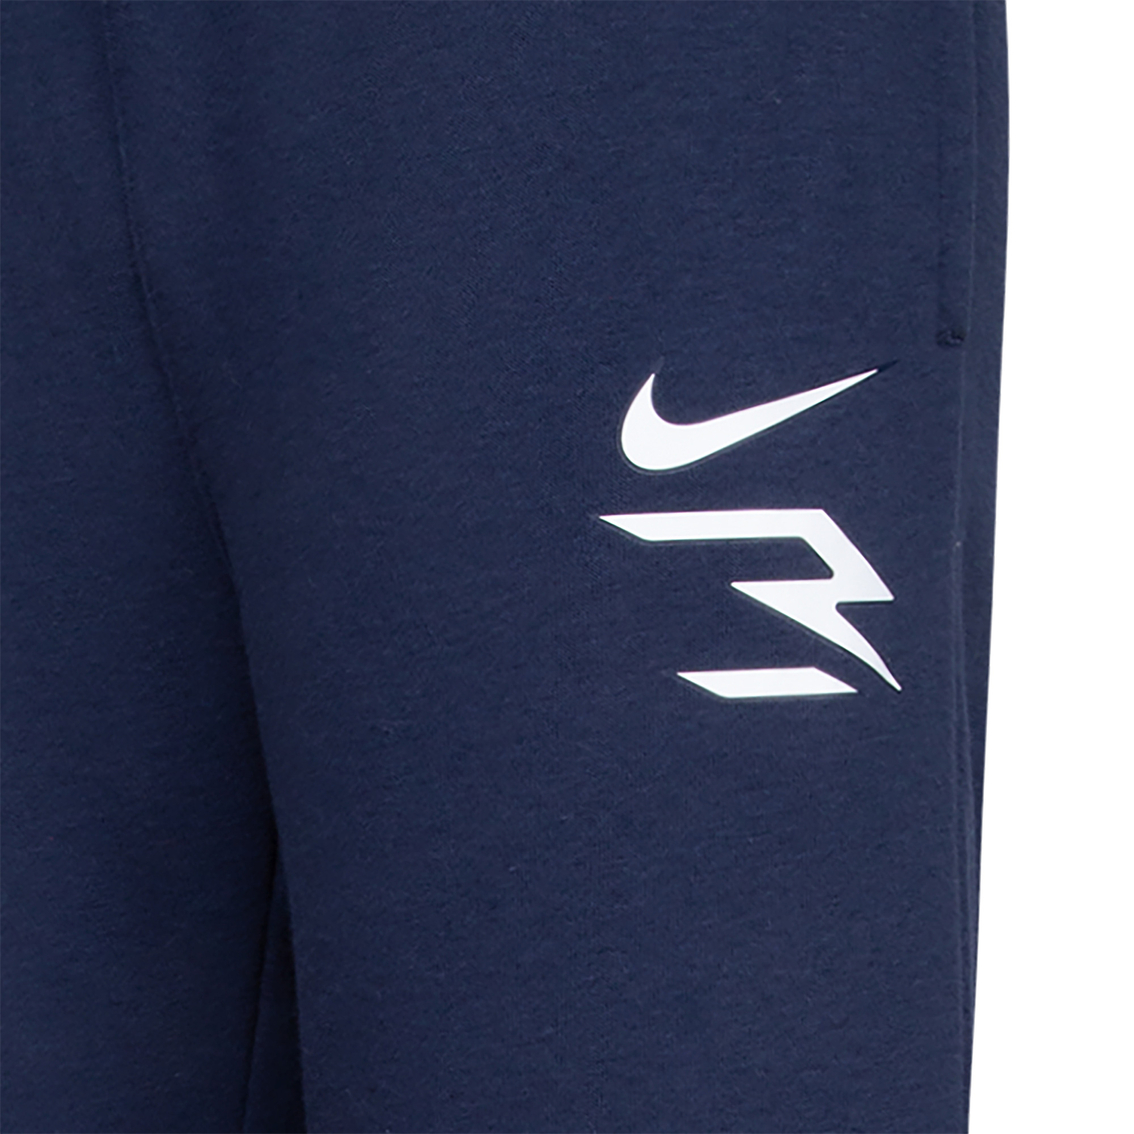 3BRAND By Russell Wilson Boys Joggers - Image 6 of 6